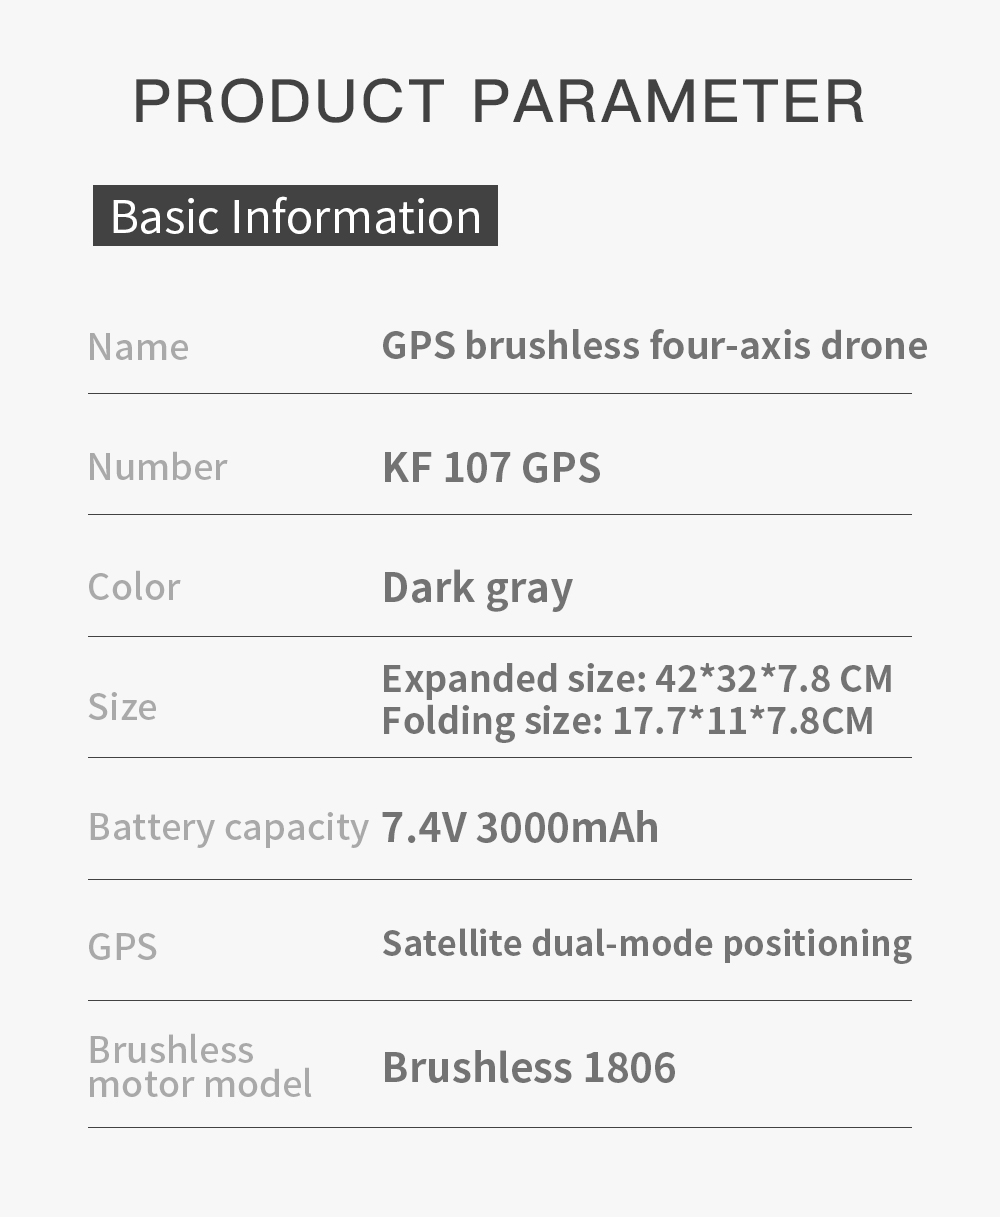 KF107-GPS-5G-WiFi-12KM-FPV-with-4K-Servo-Camera-Optical-Flow-Positioning-Brushless-Foldable-RC-Drone-1740852-28